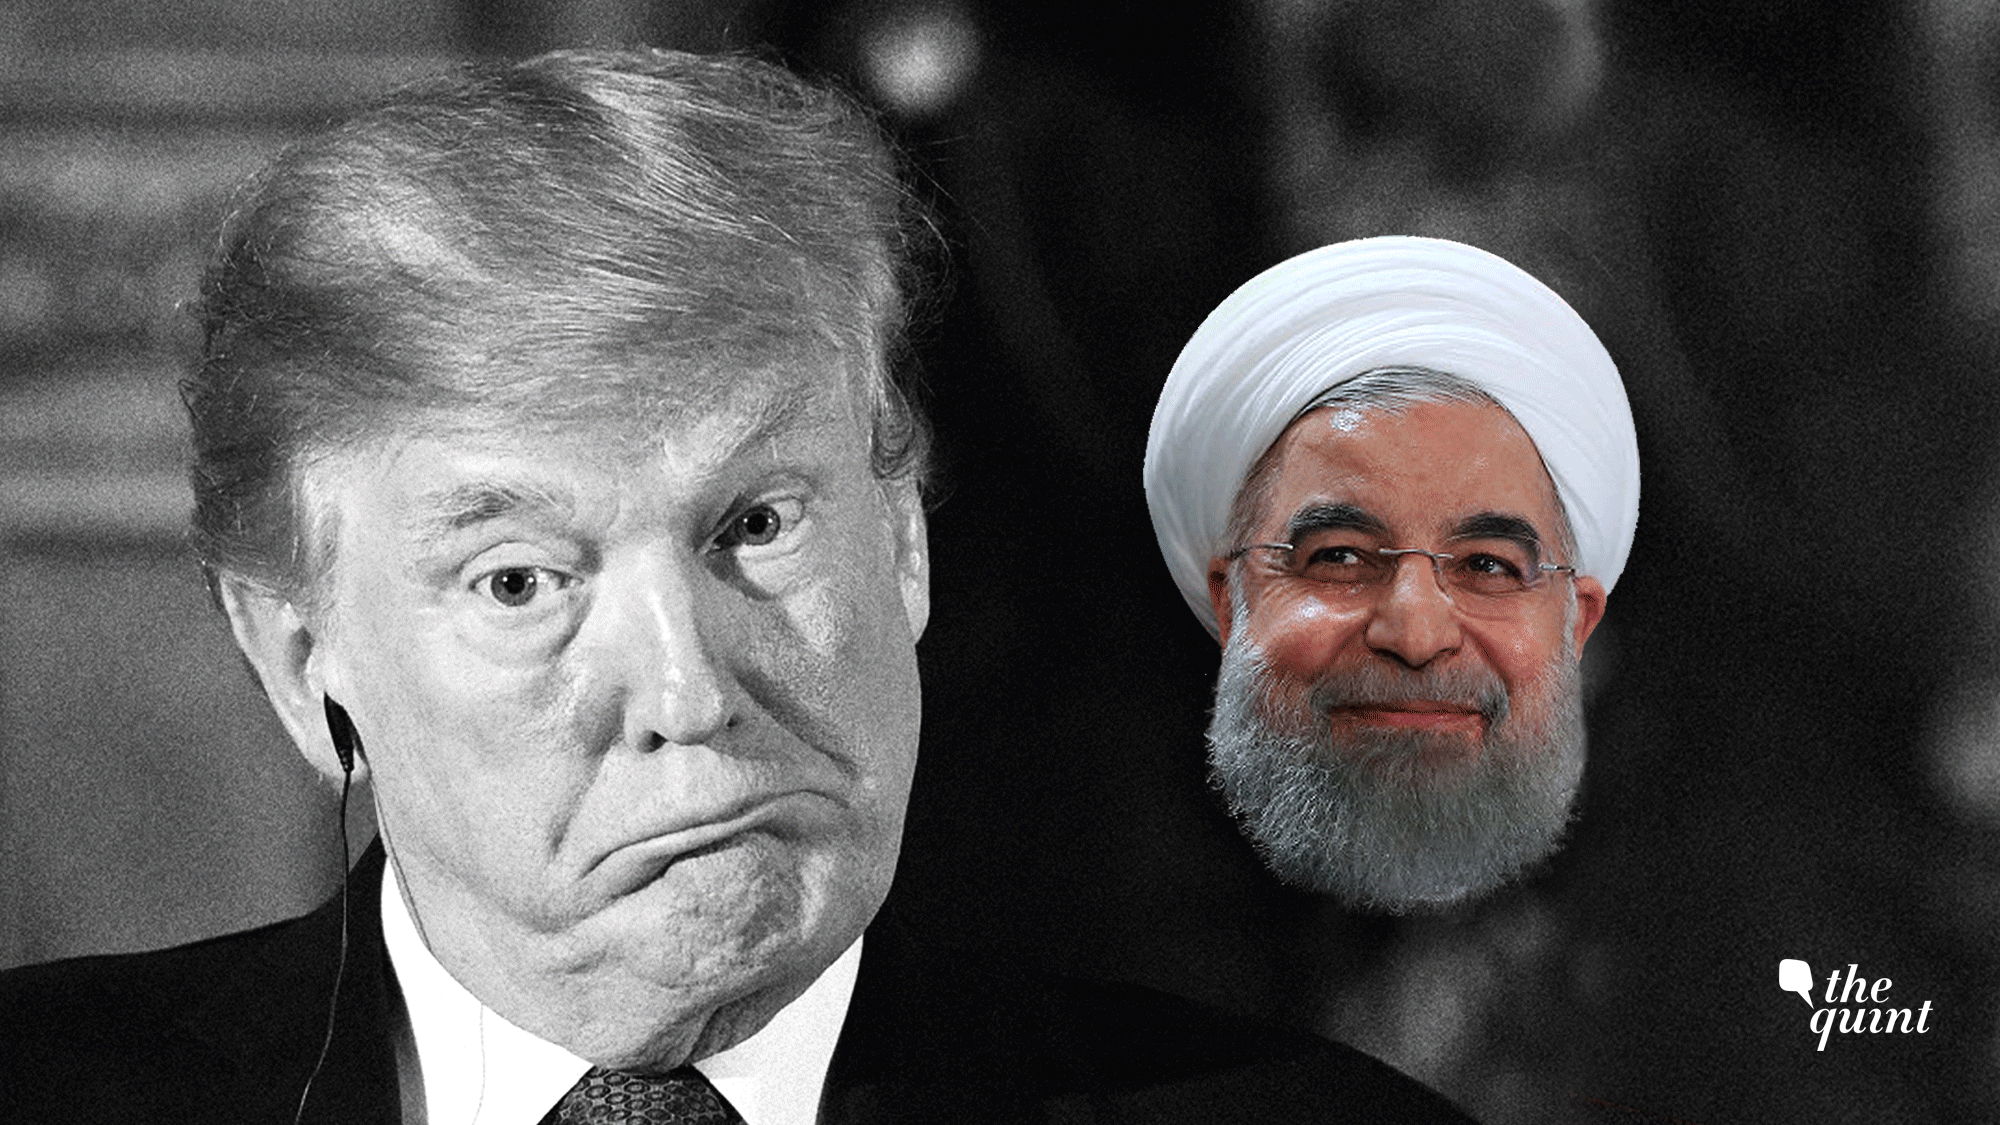 US President Donald Trump signed the very vague North Korean nuclear deal, but tore up the Iran nuclear deal, which is far more comprehensive and reassuring.